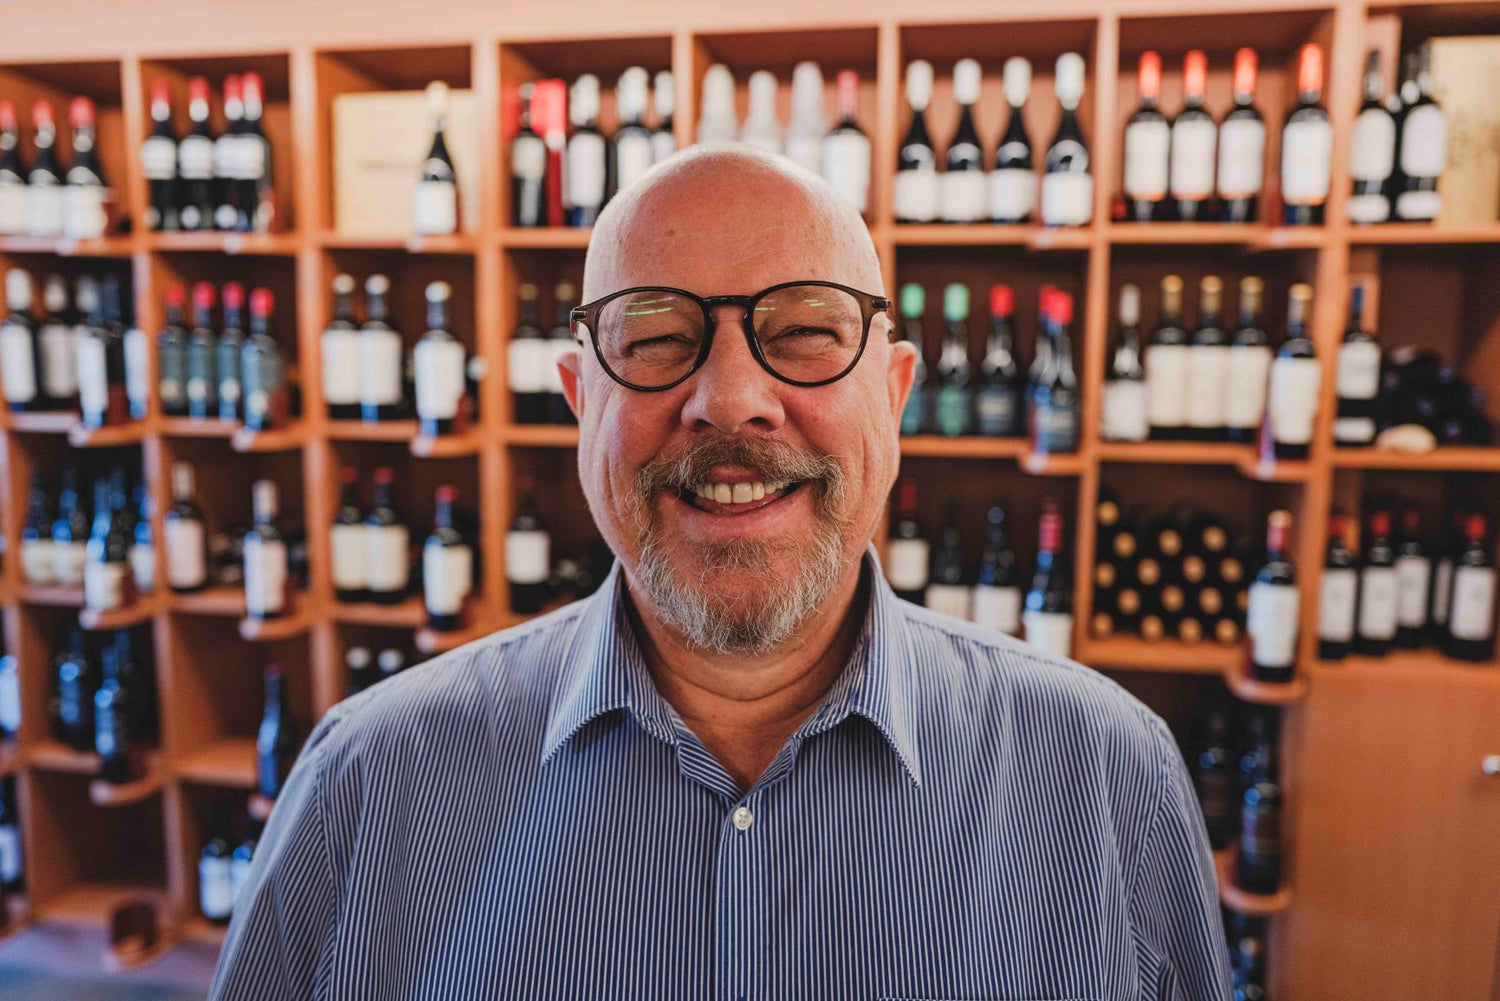 Guy Dresselaers posing for a portrait in his Elvino store